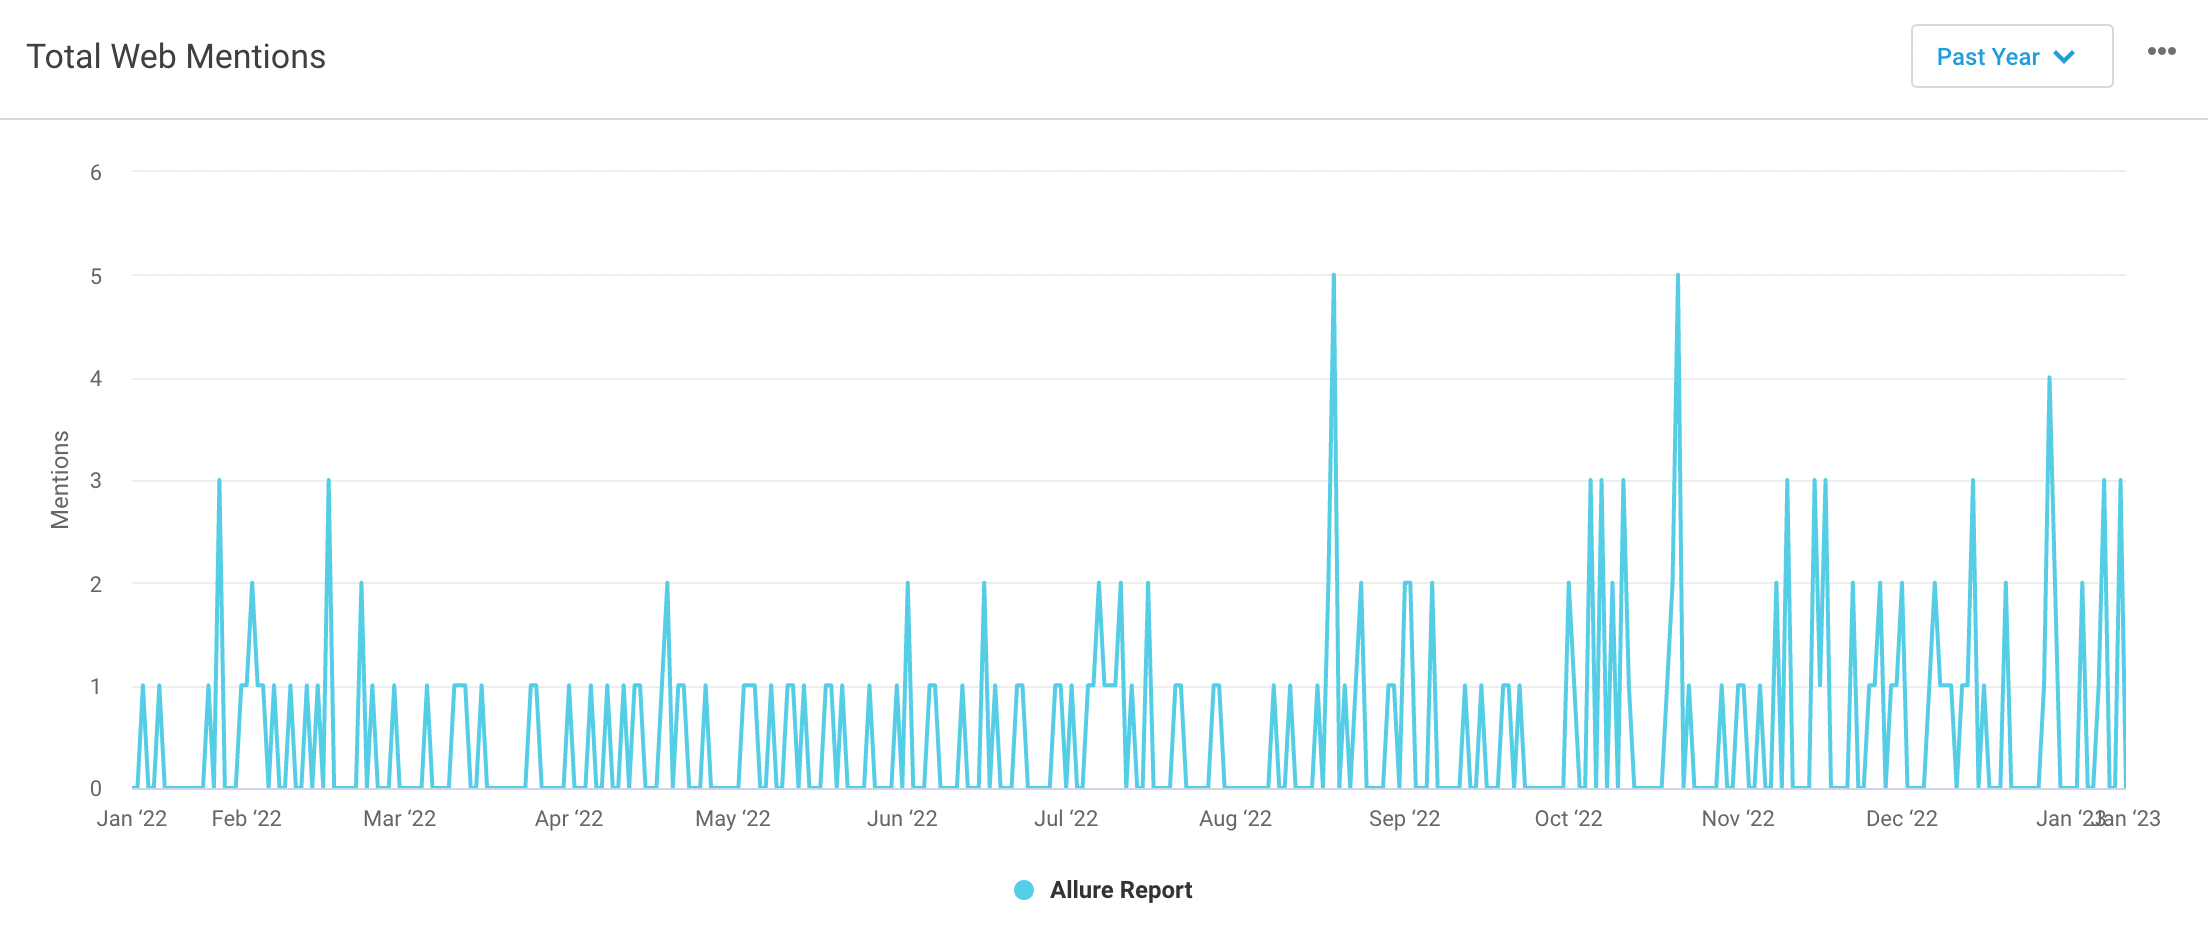 Web mentions of Allure Report